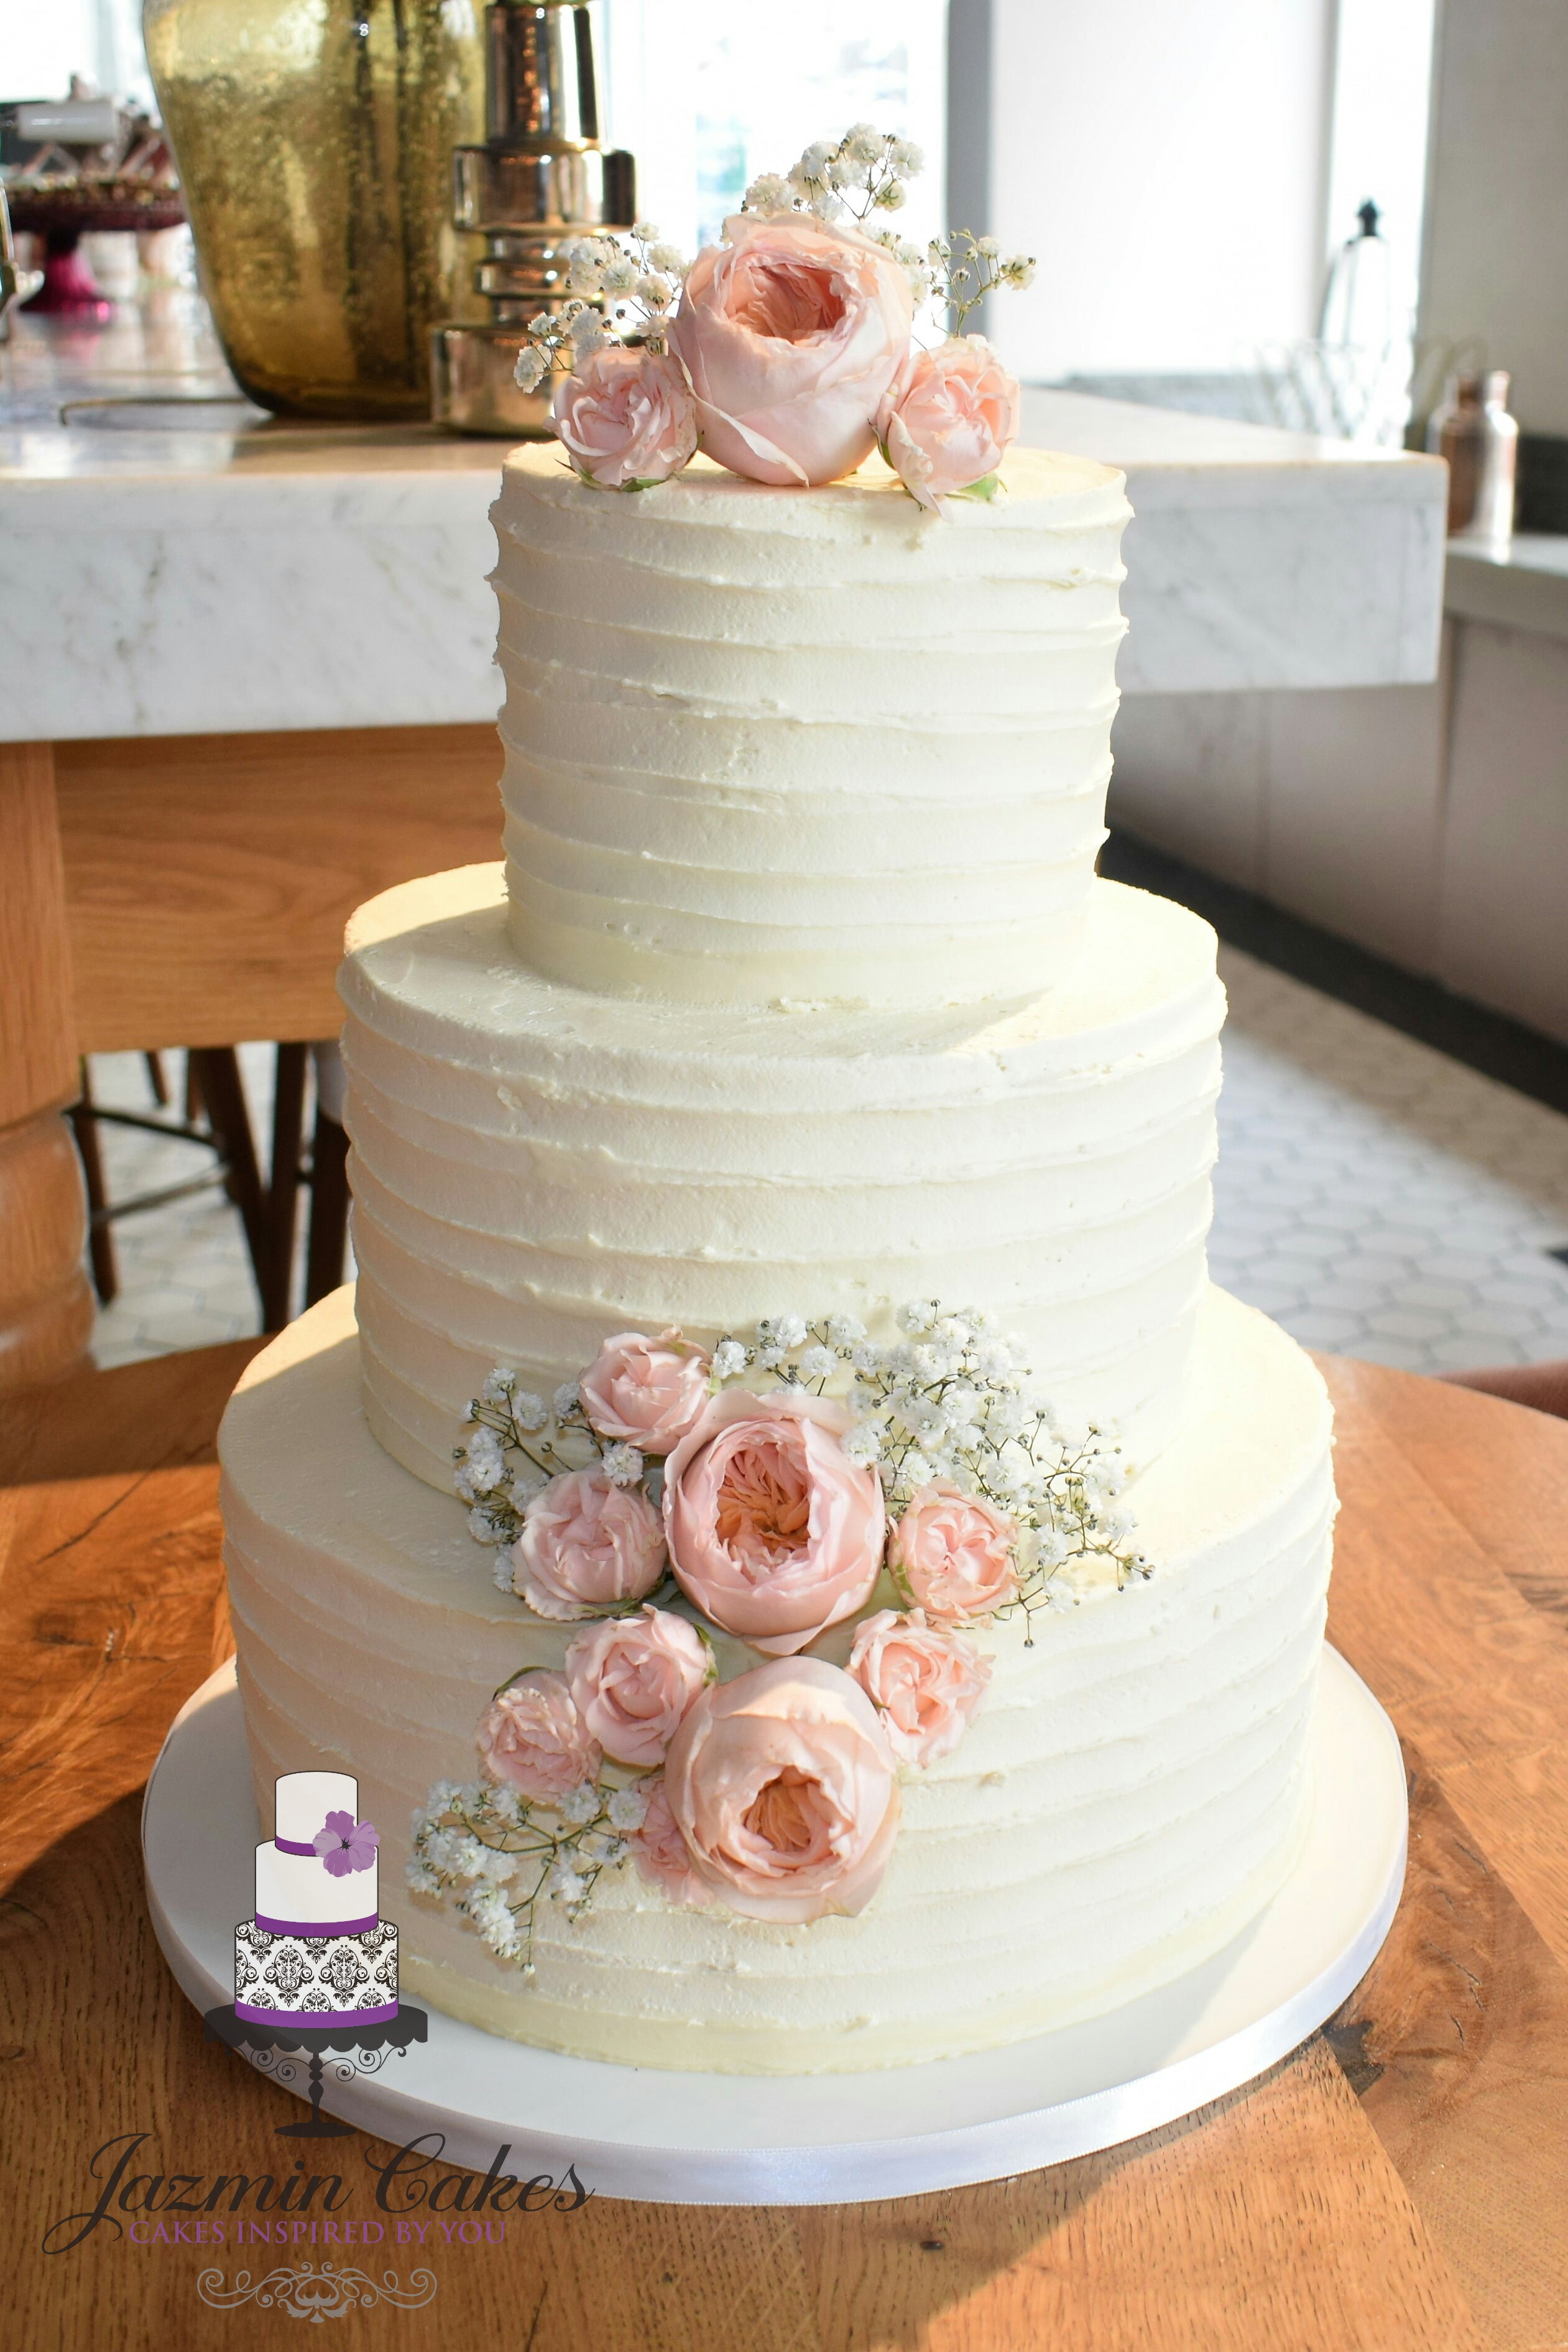 How much did your wedding cake cost you!! And share your cake inspirations!